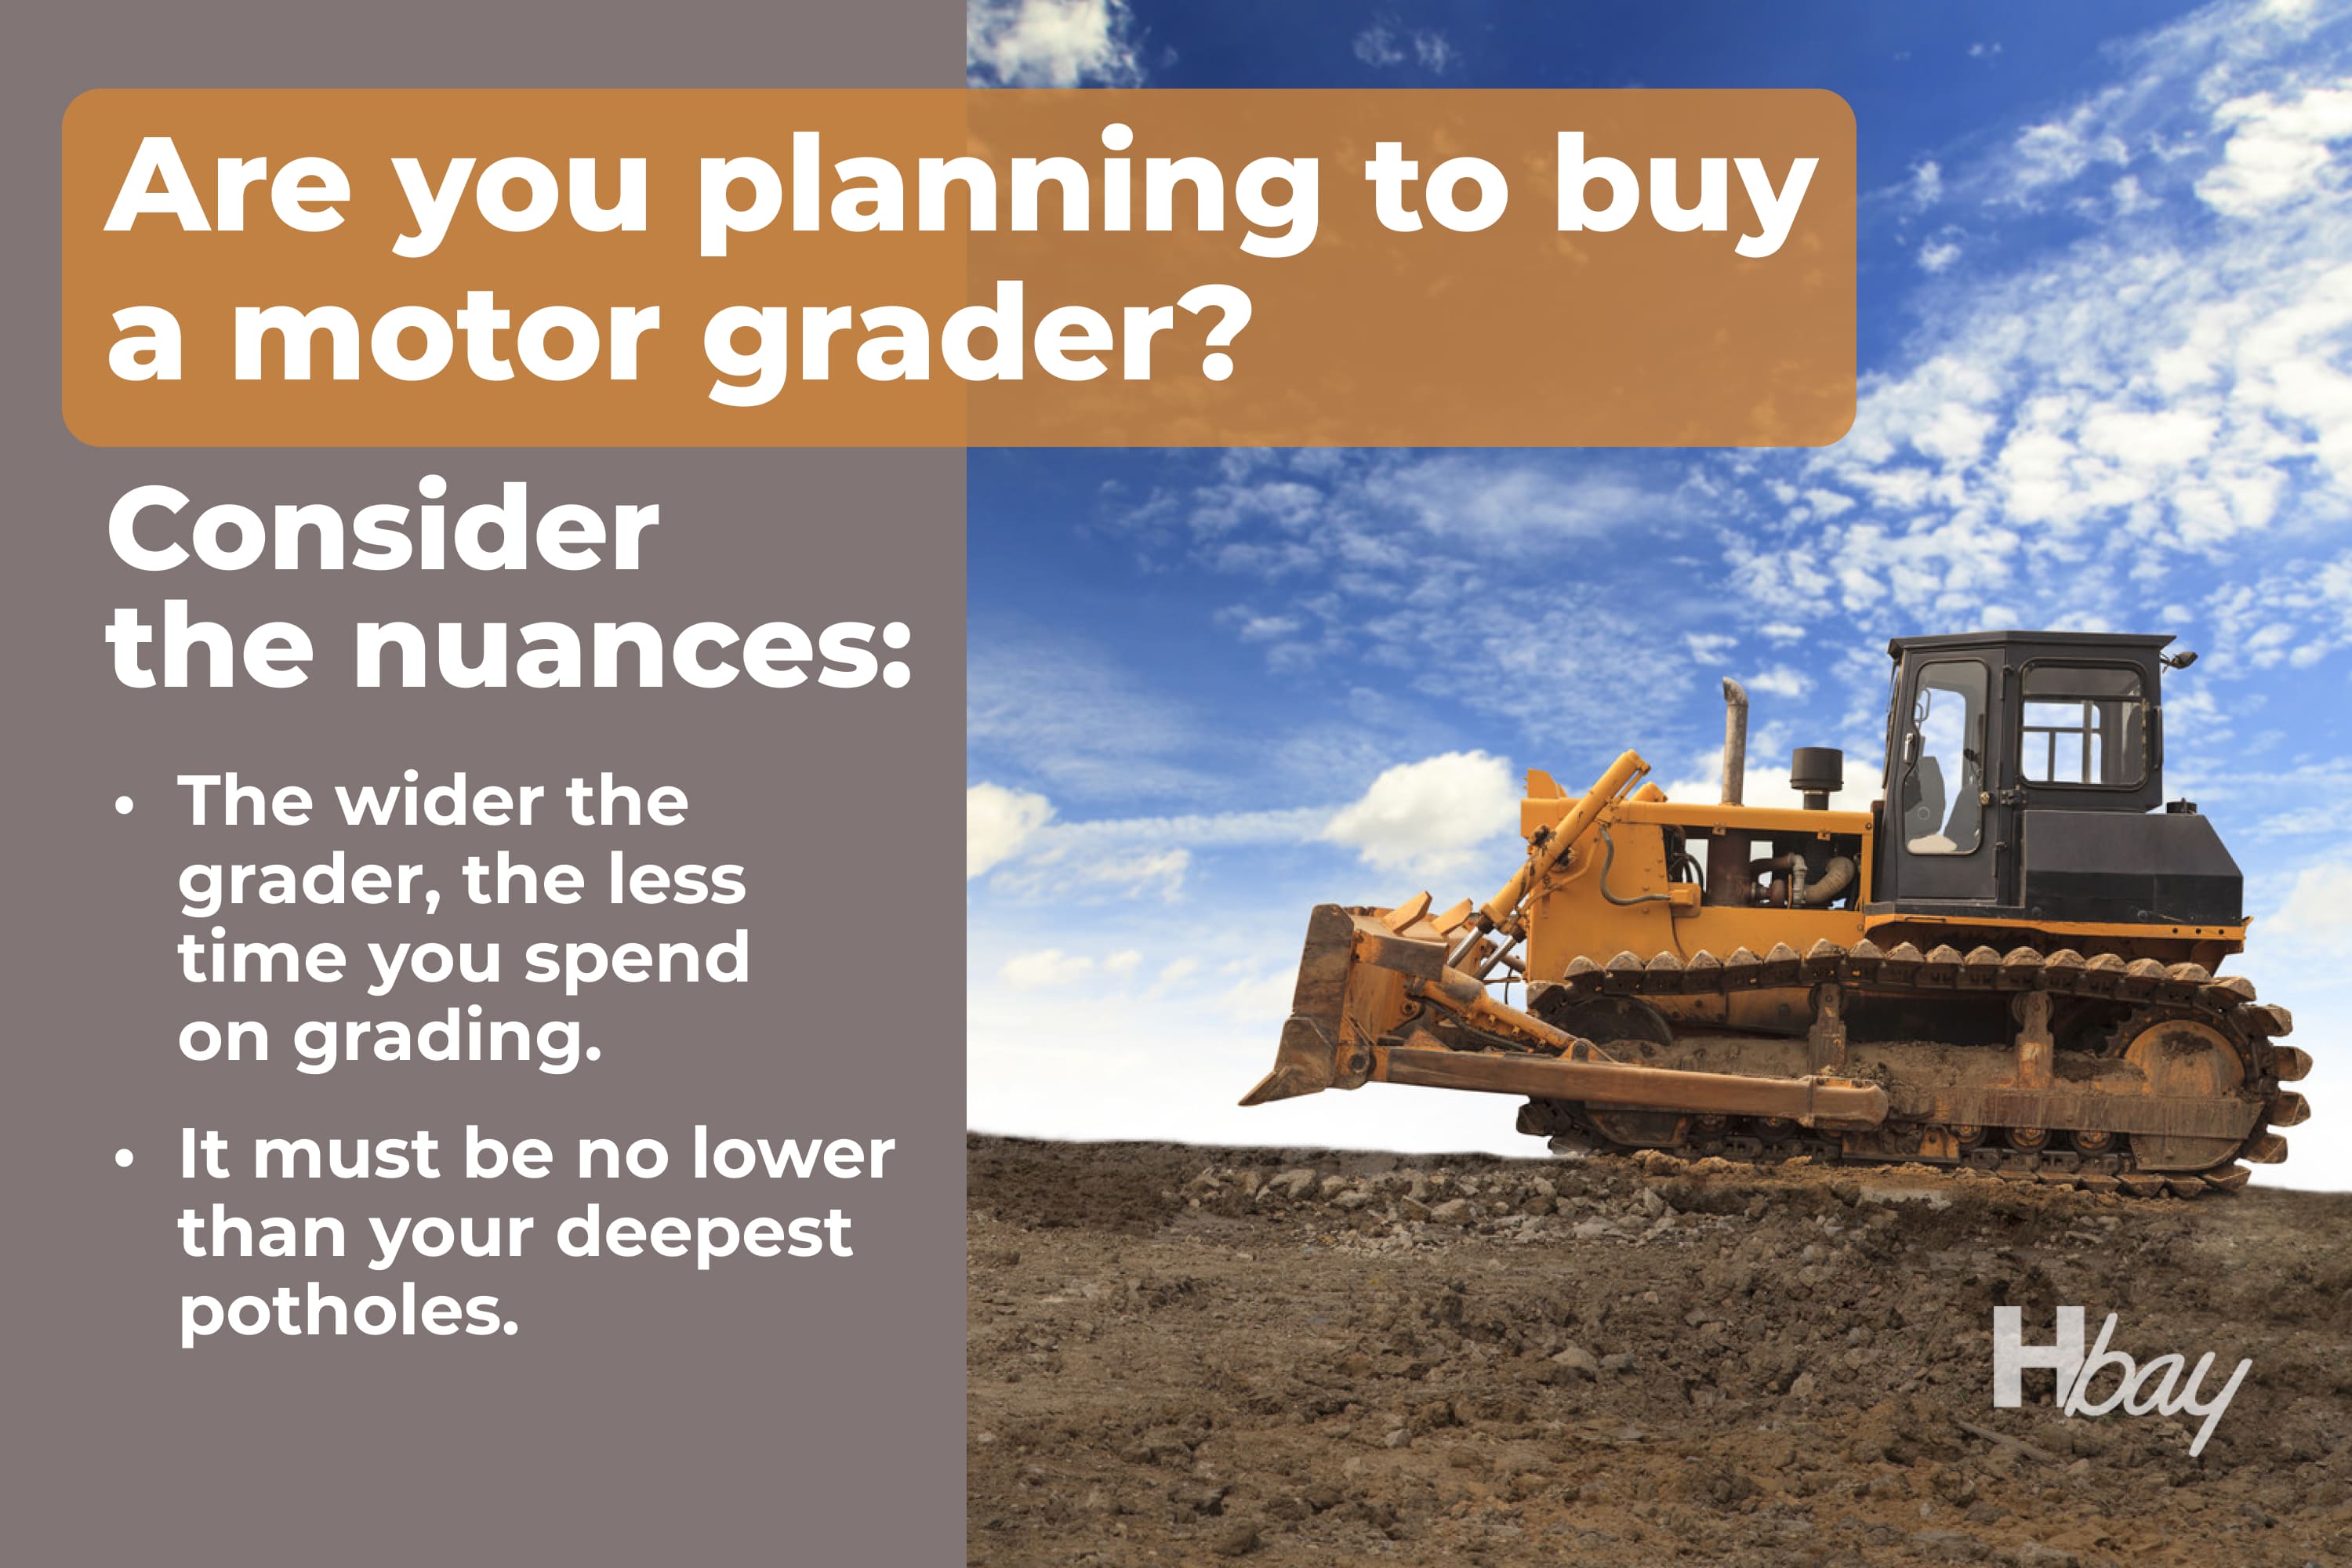 Are you planning to buy a motor grader Consider the nuances